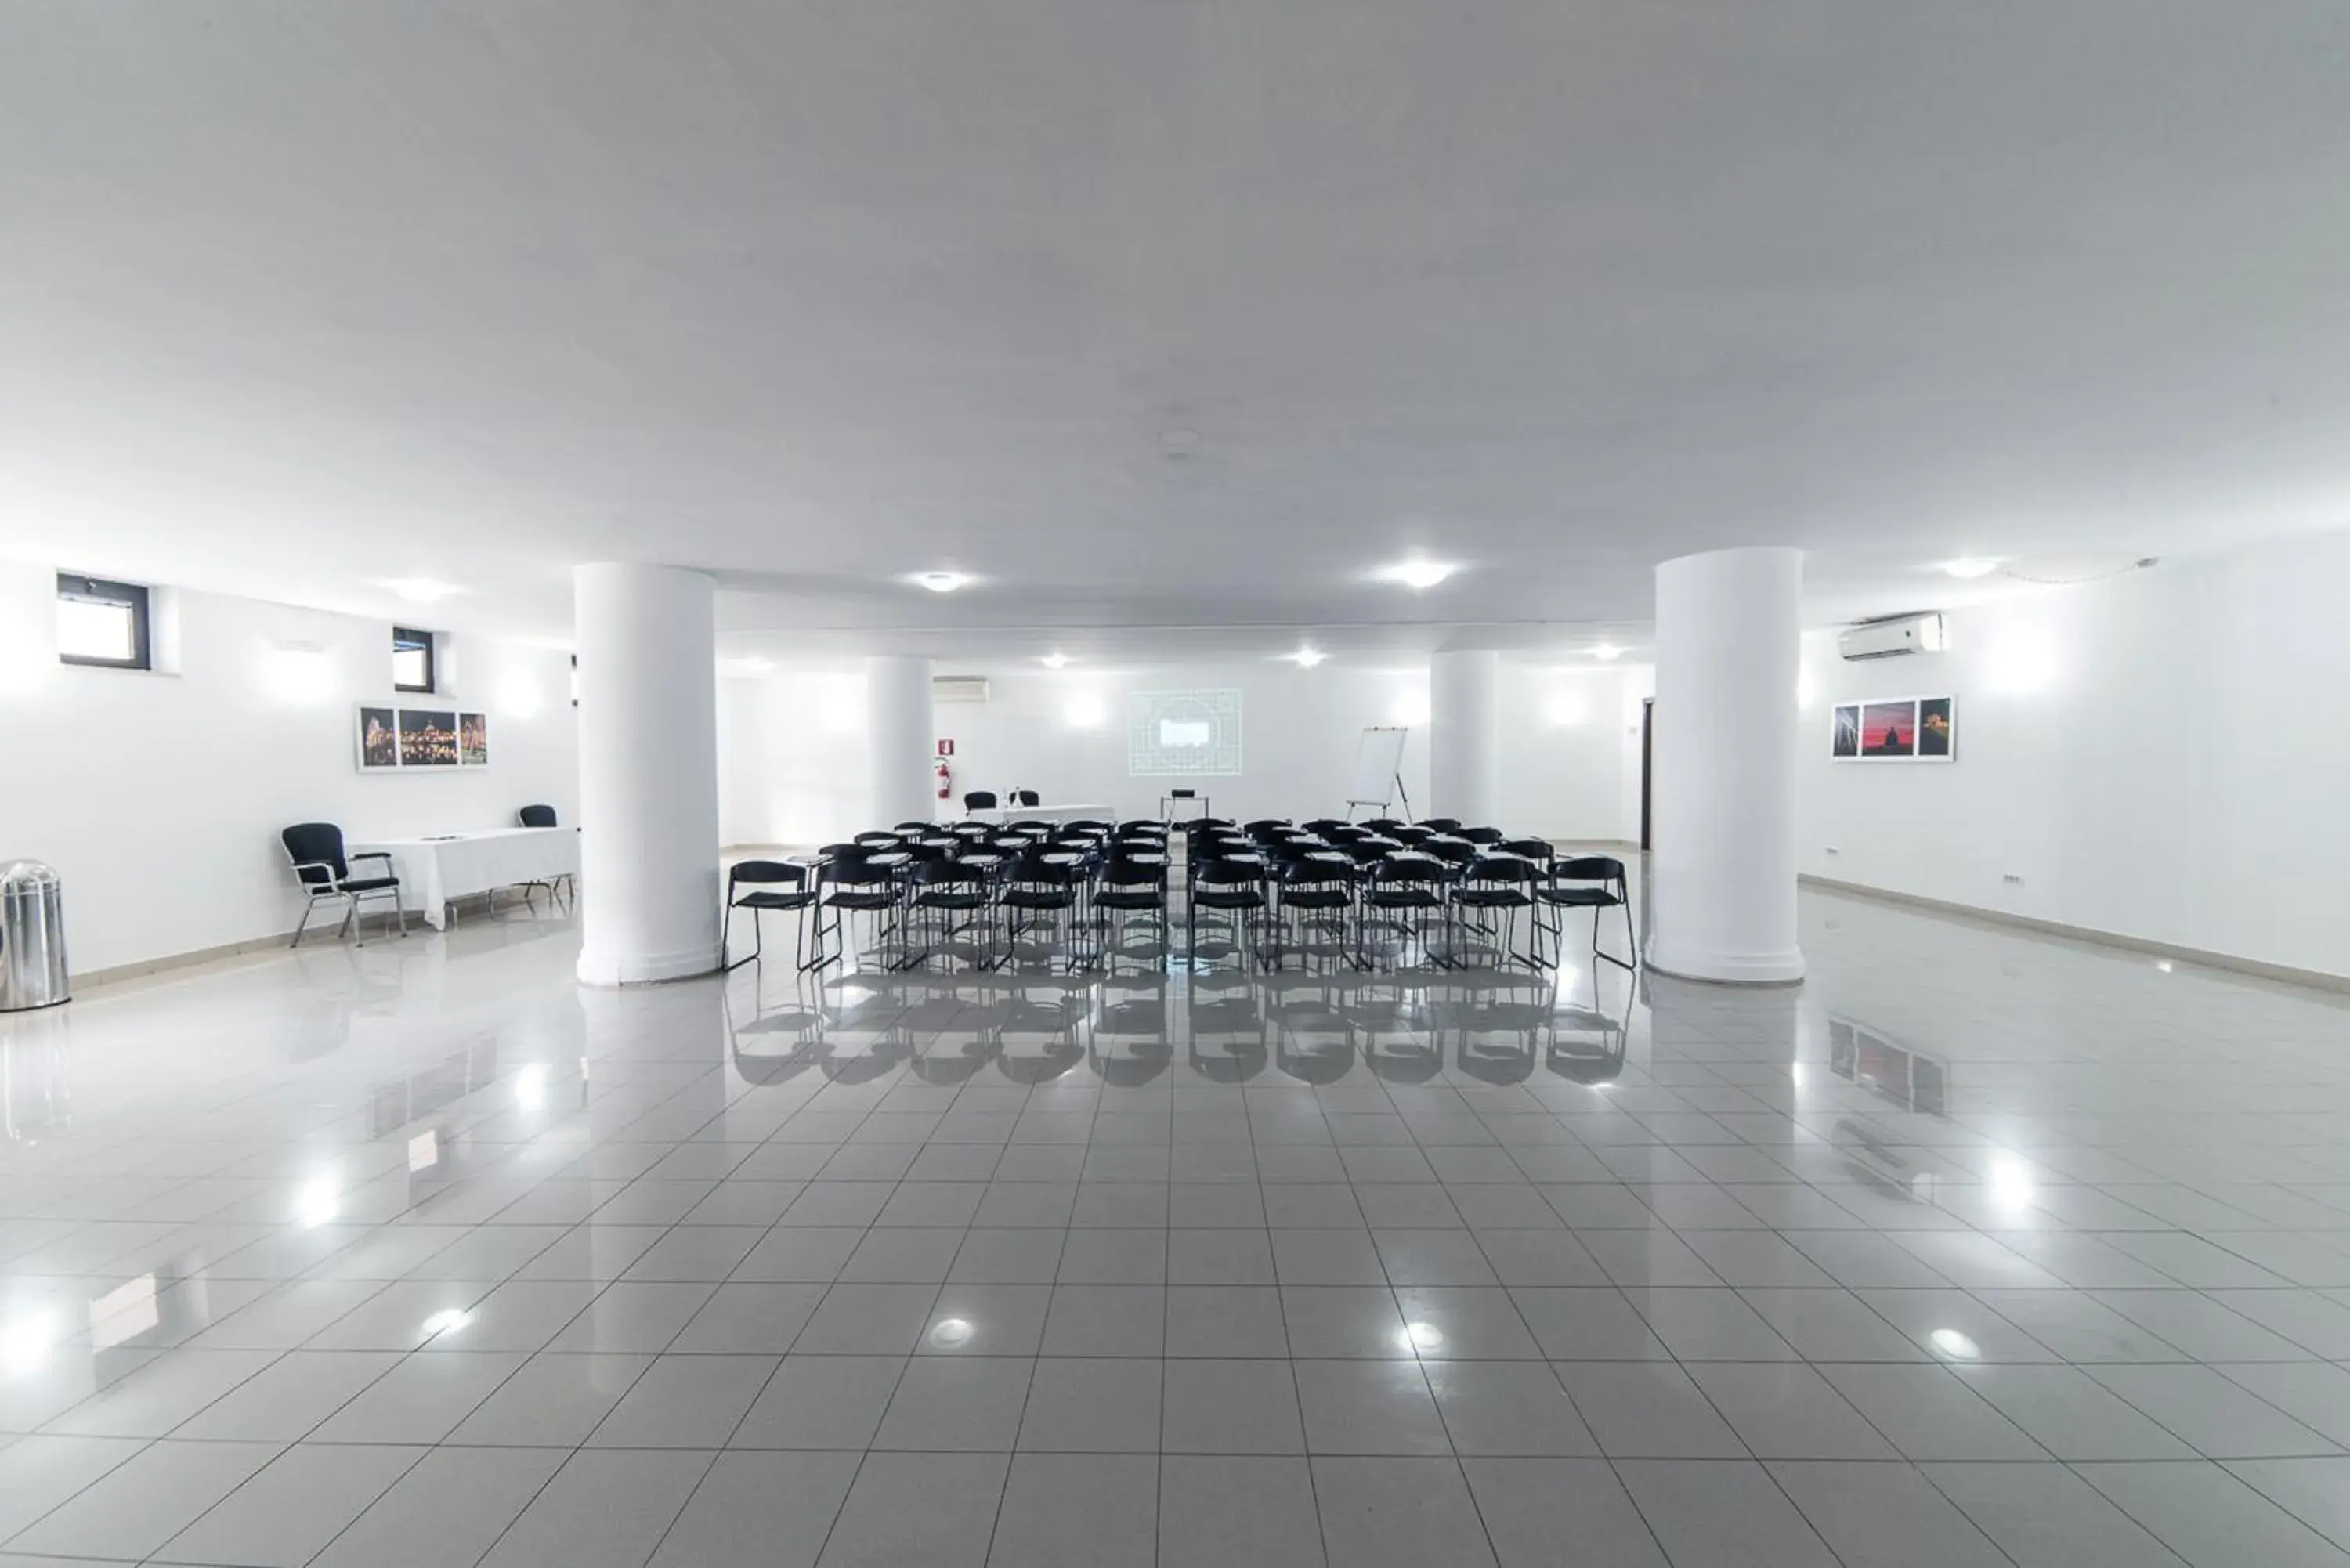 Meeting/conference room, Banquet Facilities in SOTEL NOMENTANA